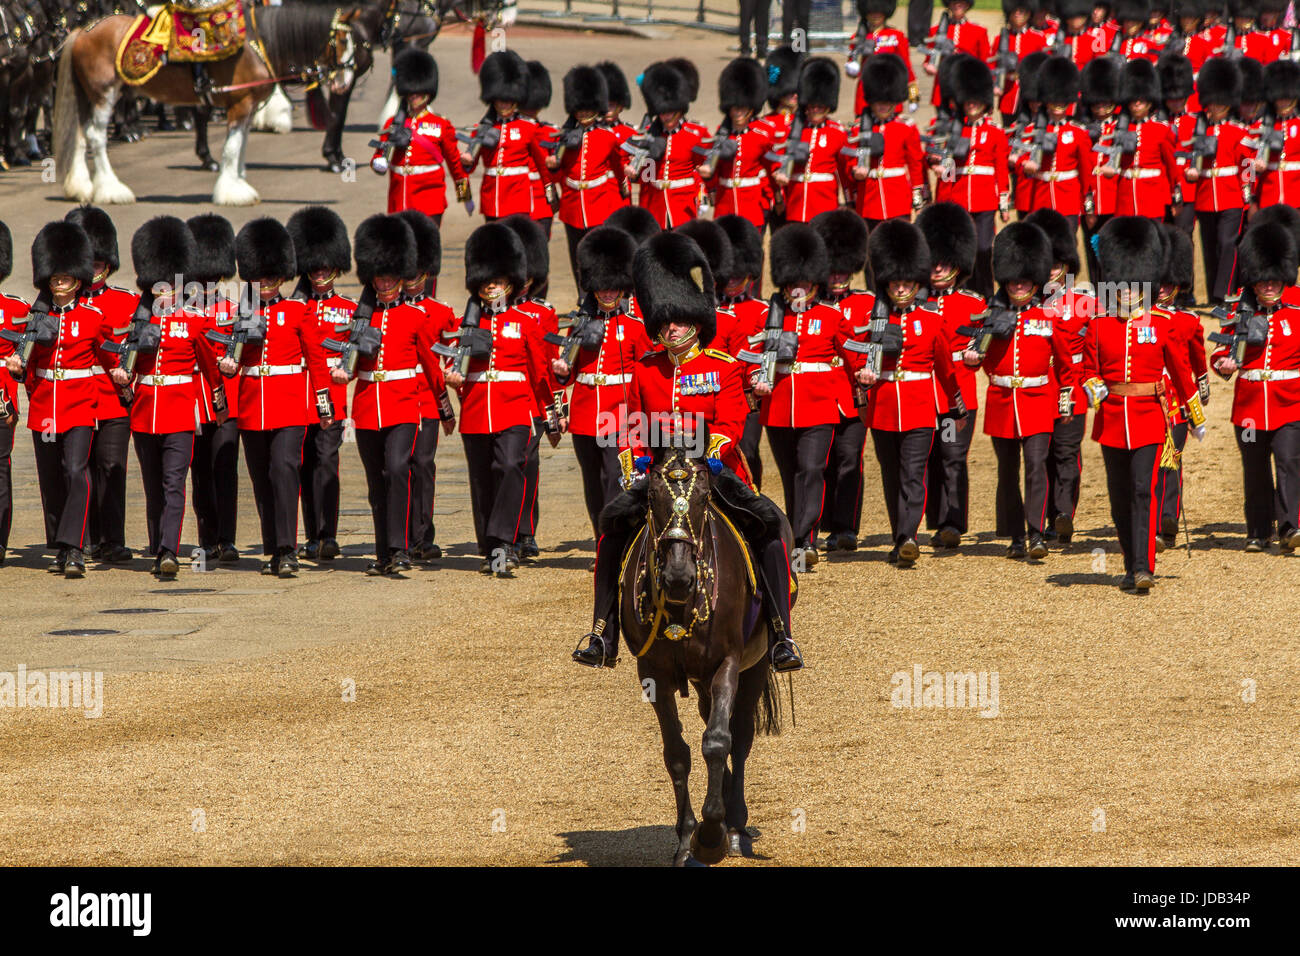 An officer on horseback leads The Irish Guards as they march on Horse Guards Parade at Trooping The Colour, London, UK , 2017 Stock Photo